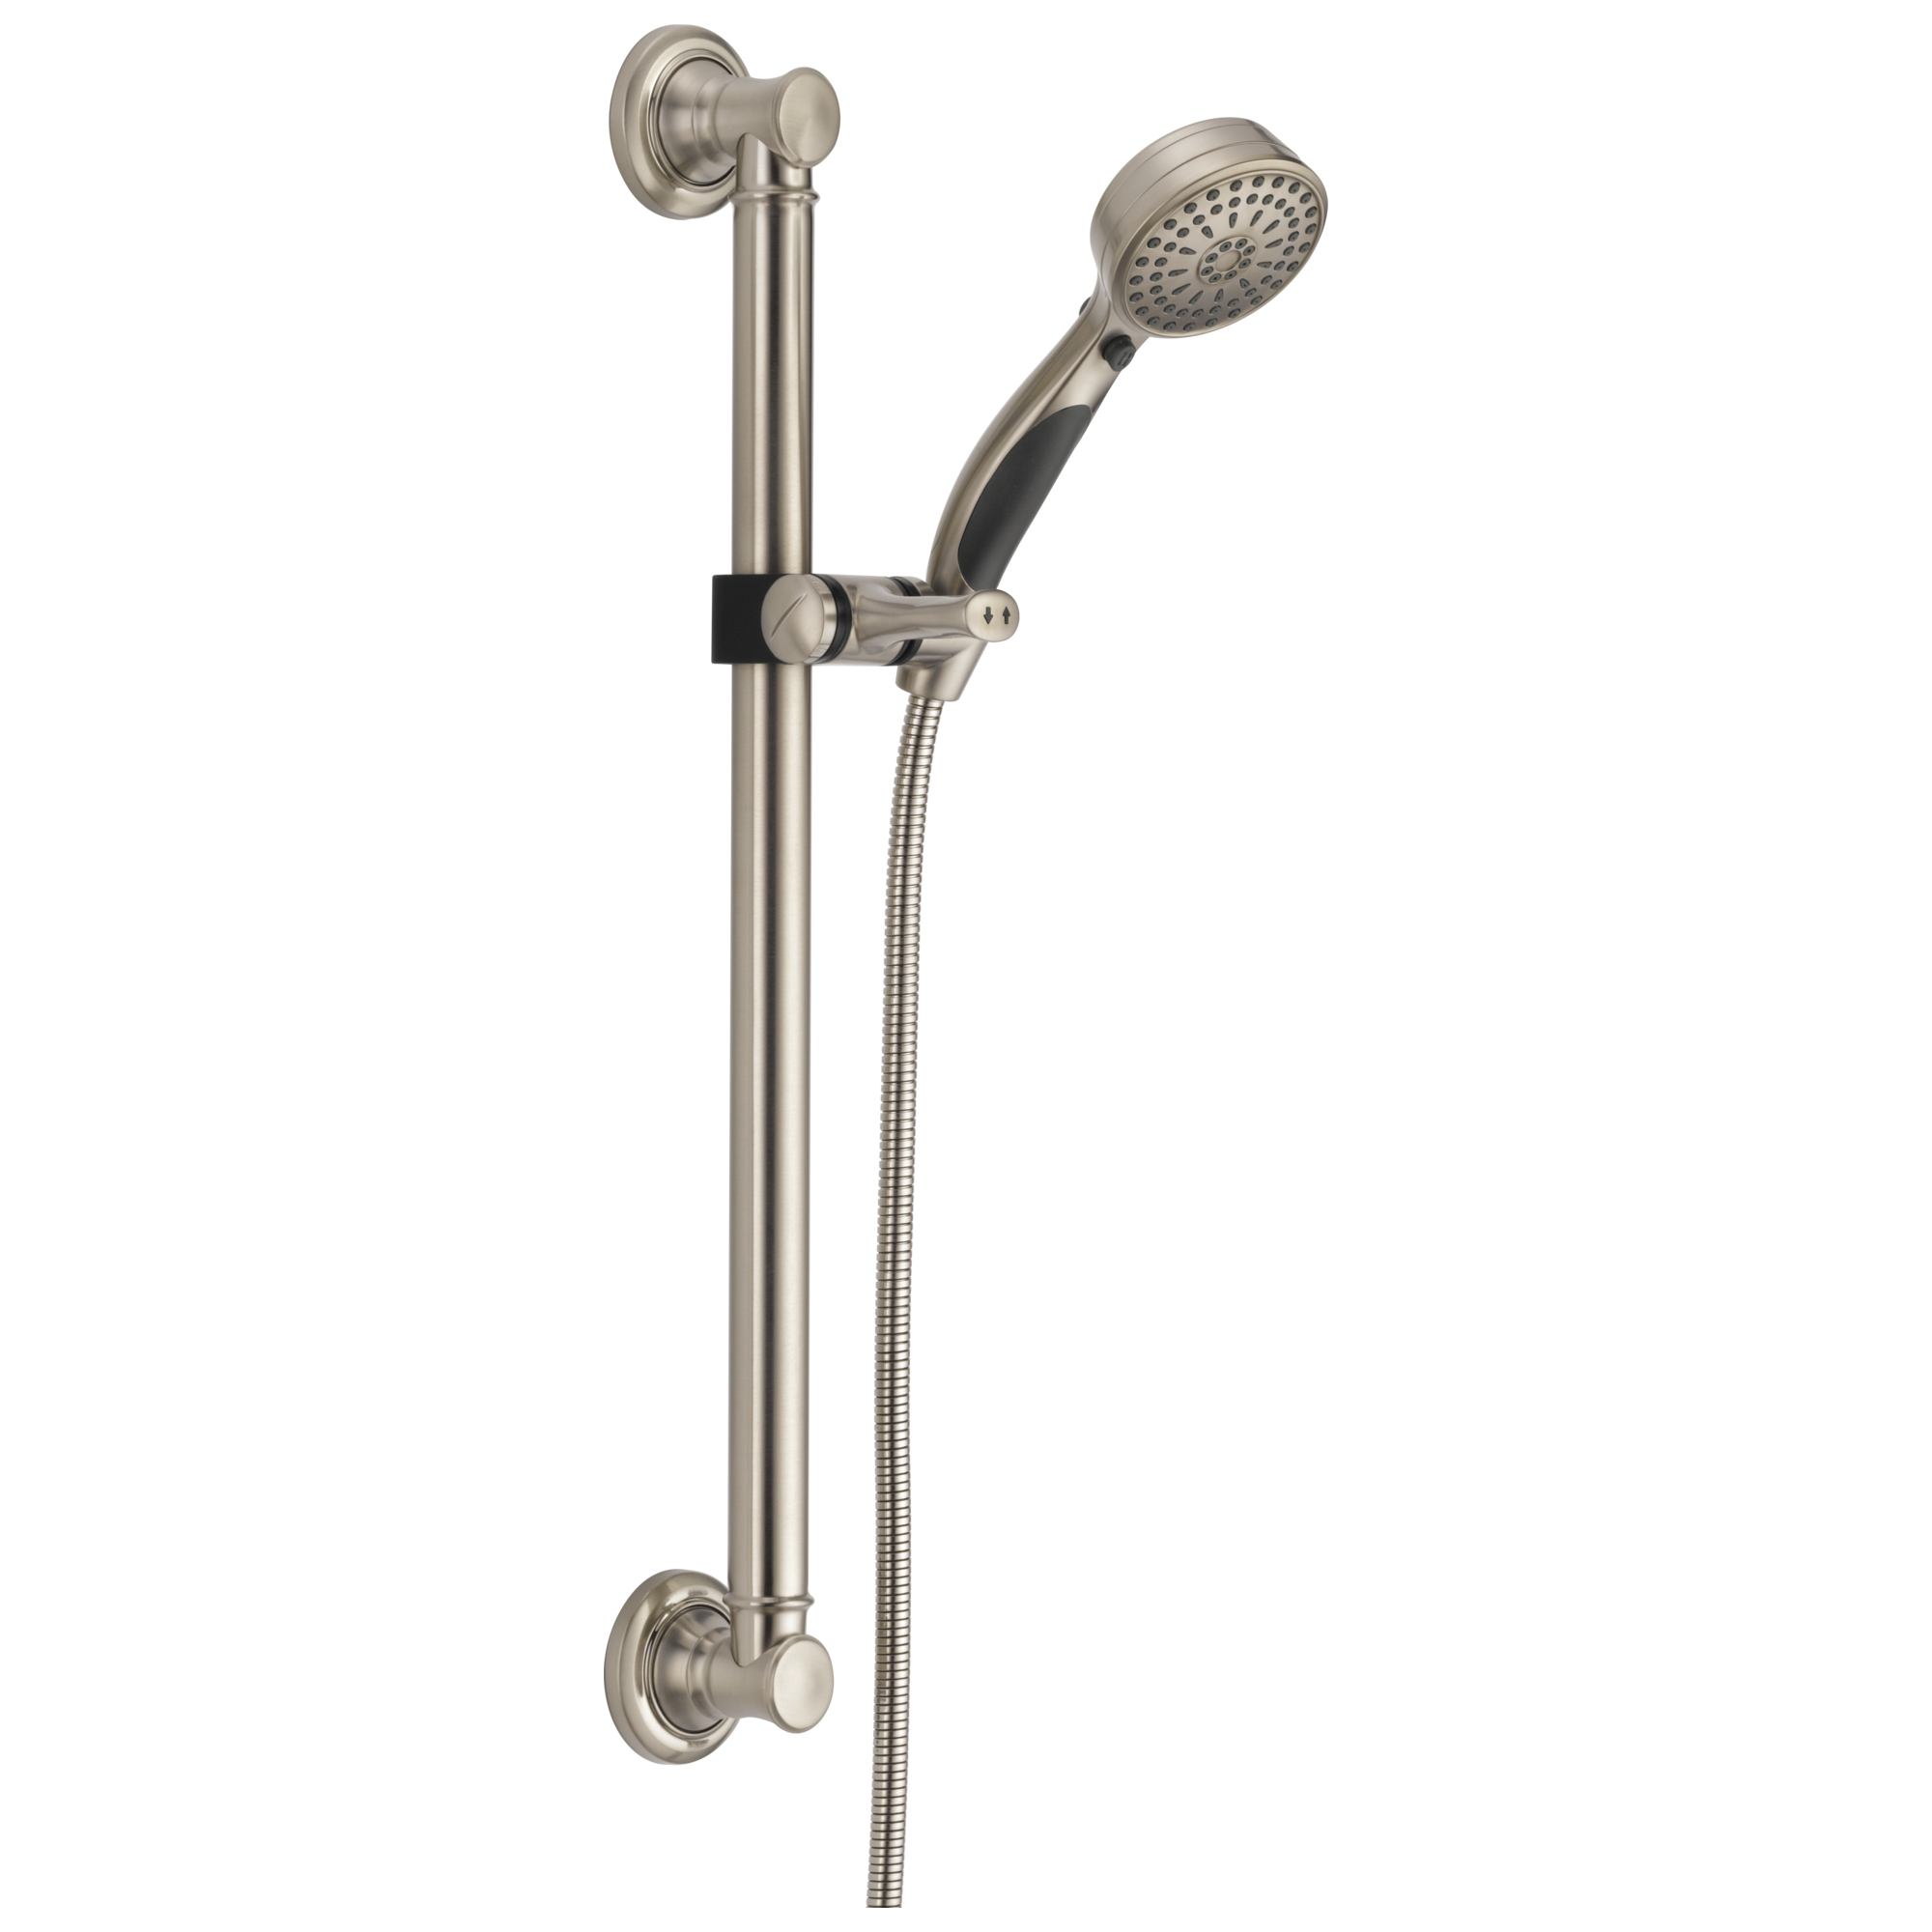 9-Spray ActivTouch® Hand Shower with Traditional Slide Bar / Grab Bar in Stainless 51900-SS - image 1 of 8